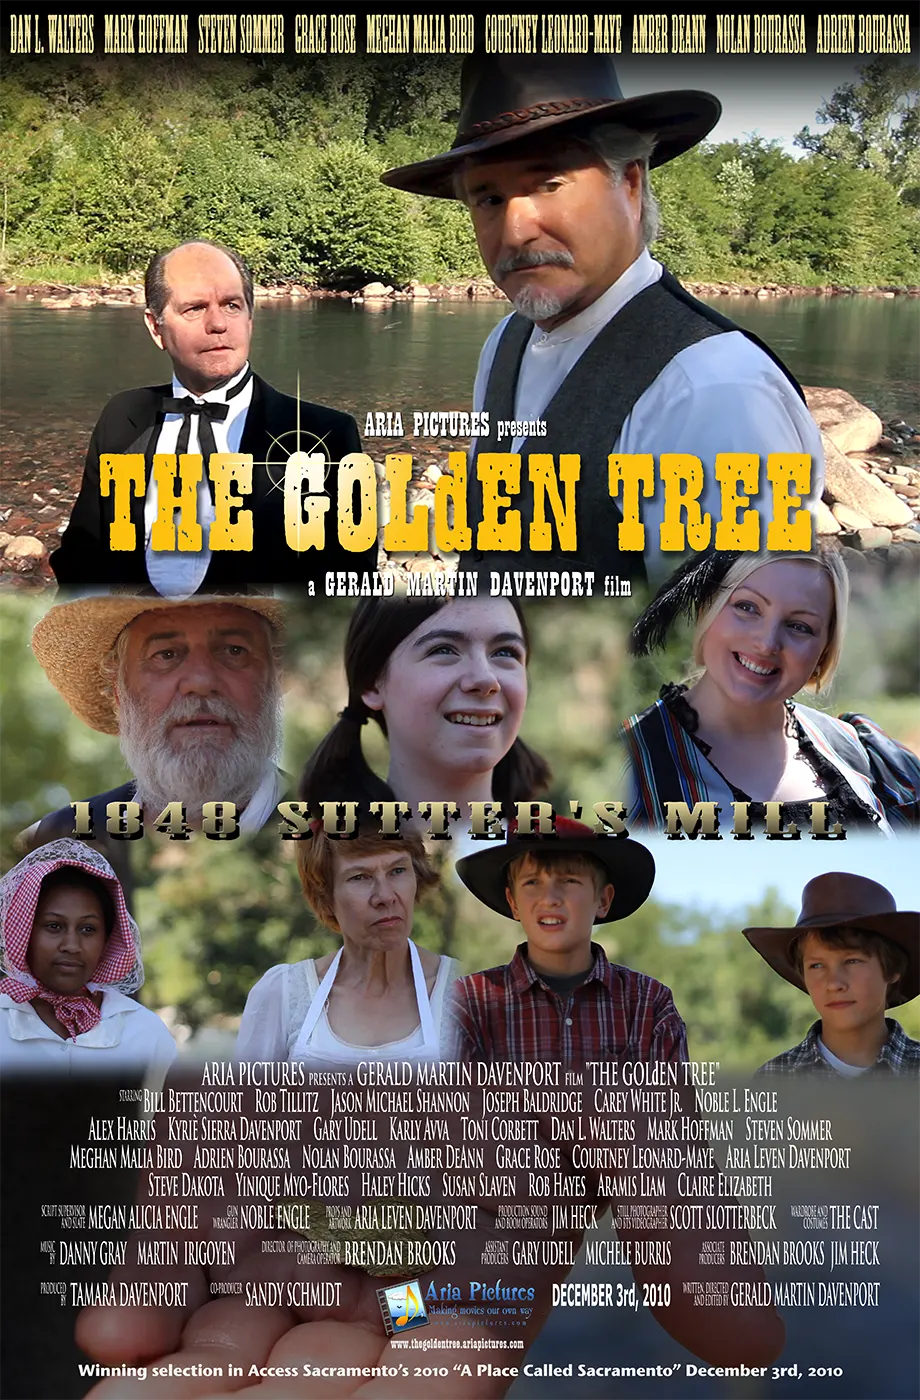 Carey White Jr poster from THE GOLdEN TREE (2010).